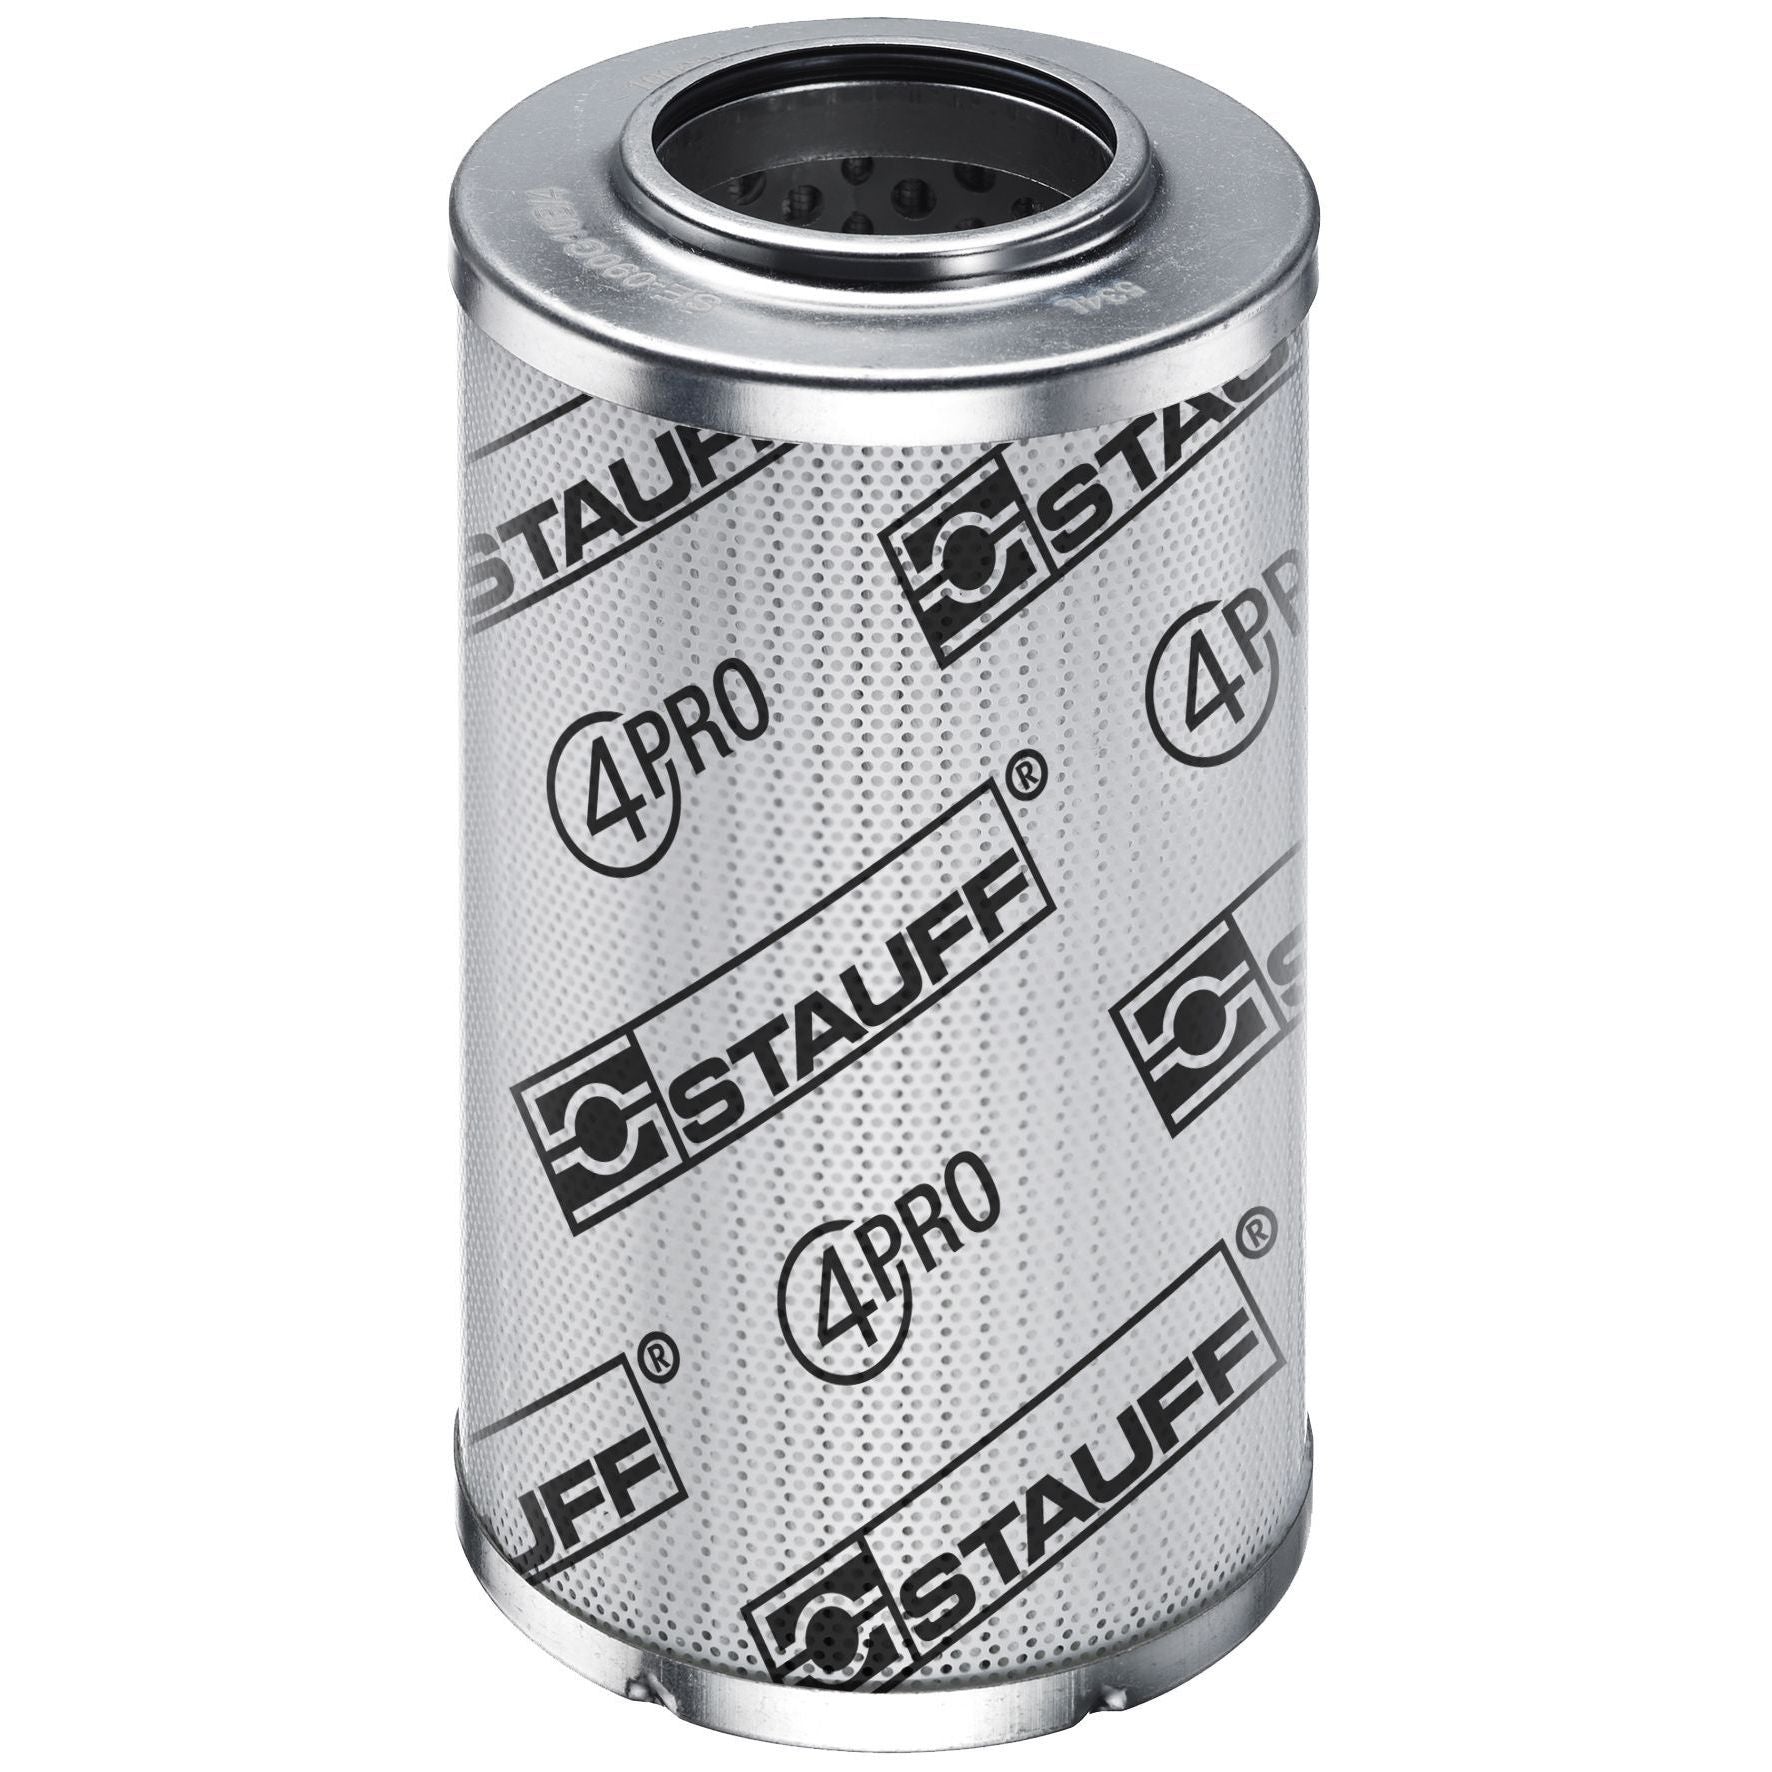 SE-014-H-03-V/2 : Stauff SF-014 Series Filter Element, 3 Micron, Synthetic, 3045psi Collapse Differential, Viton Seals